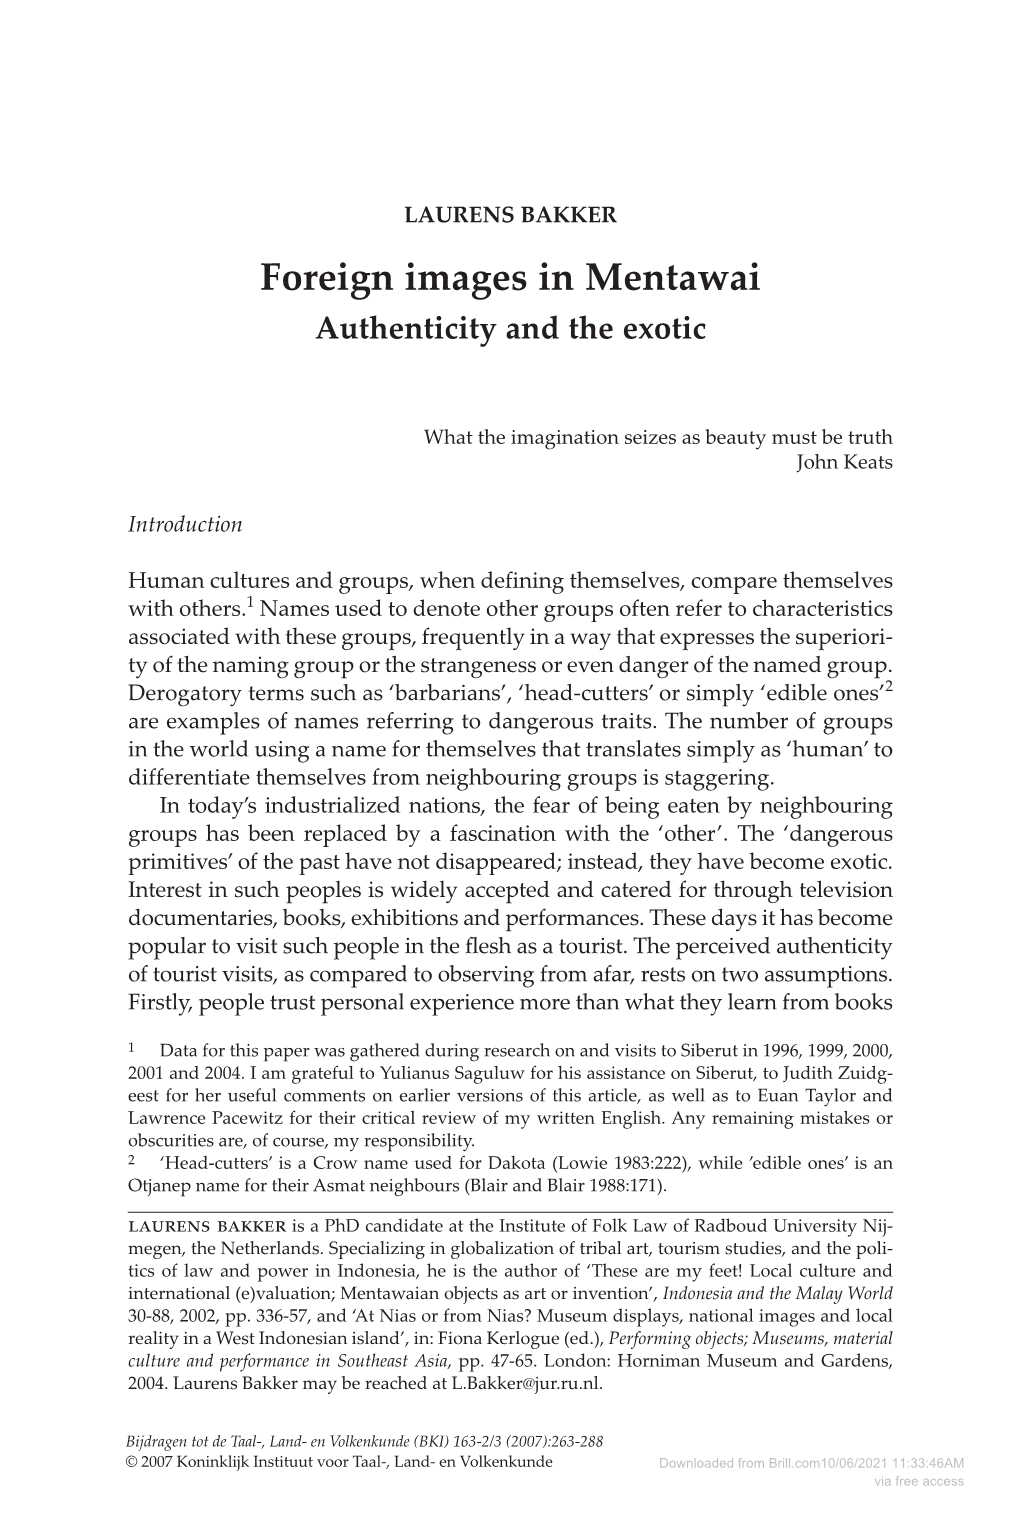 Foreign Images in Mentawai Authenticity and the Exotic